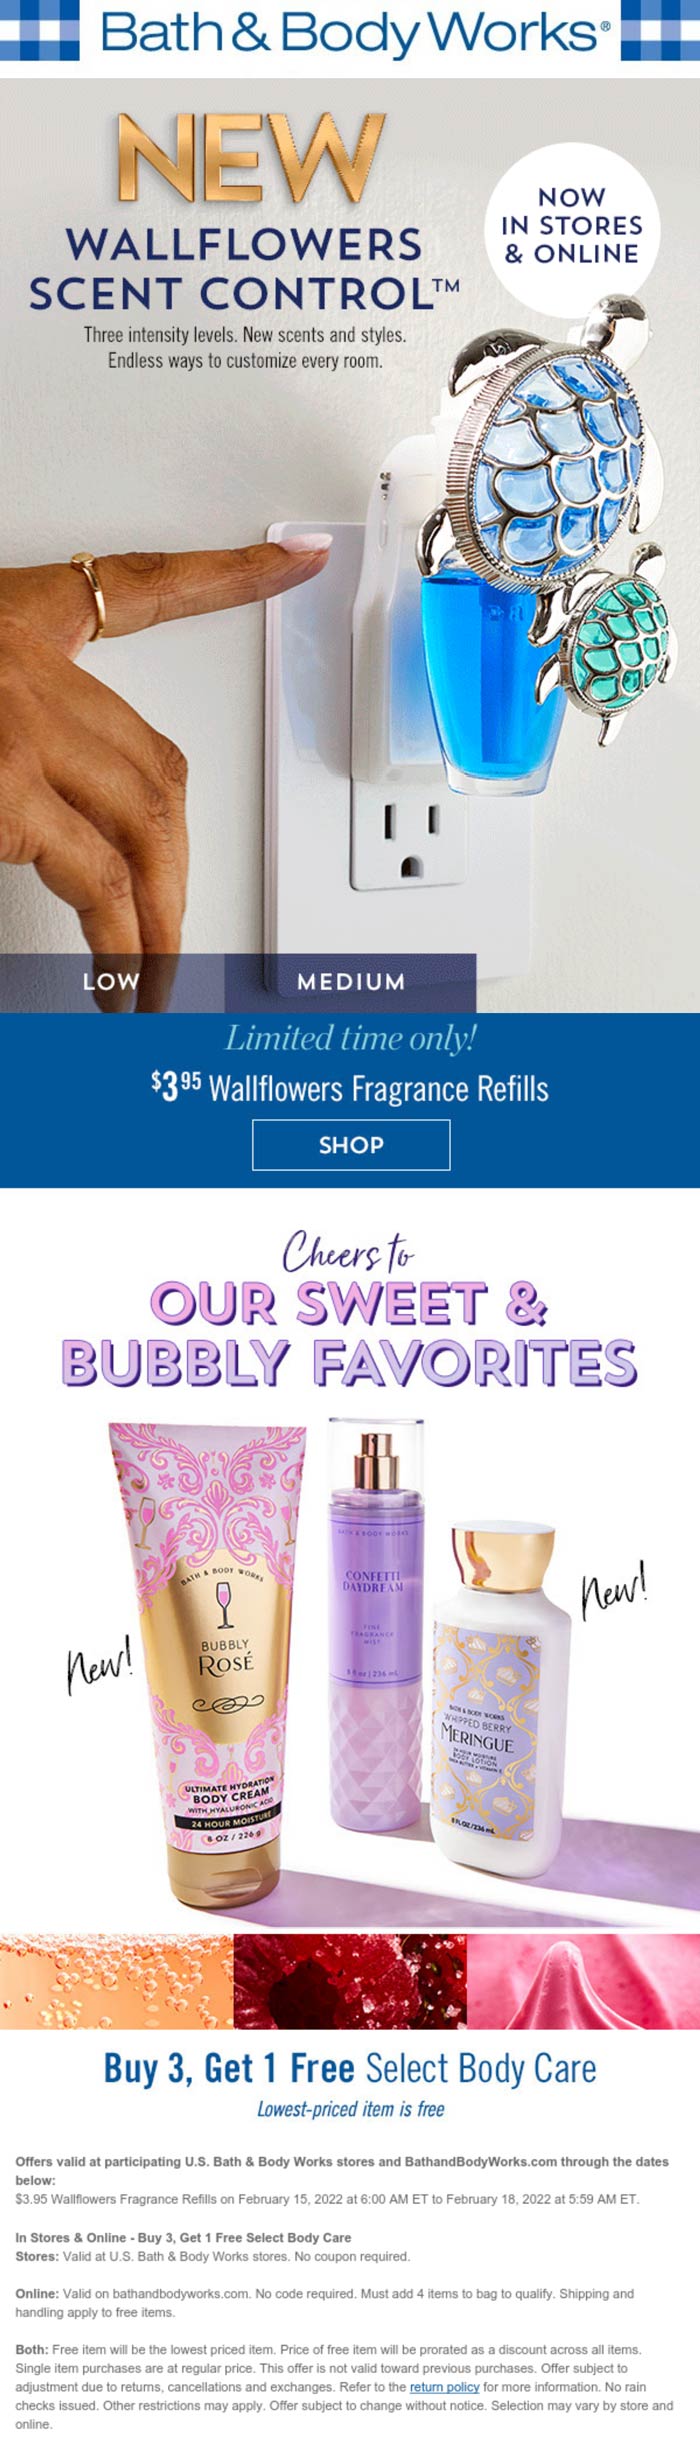 Bath & Body Works stores Coupon  4th body care free & $4 fragrance refills at Bath & Body Works, ditto online #bathbodyworks 